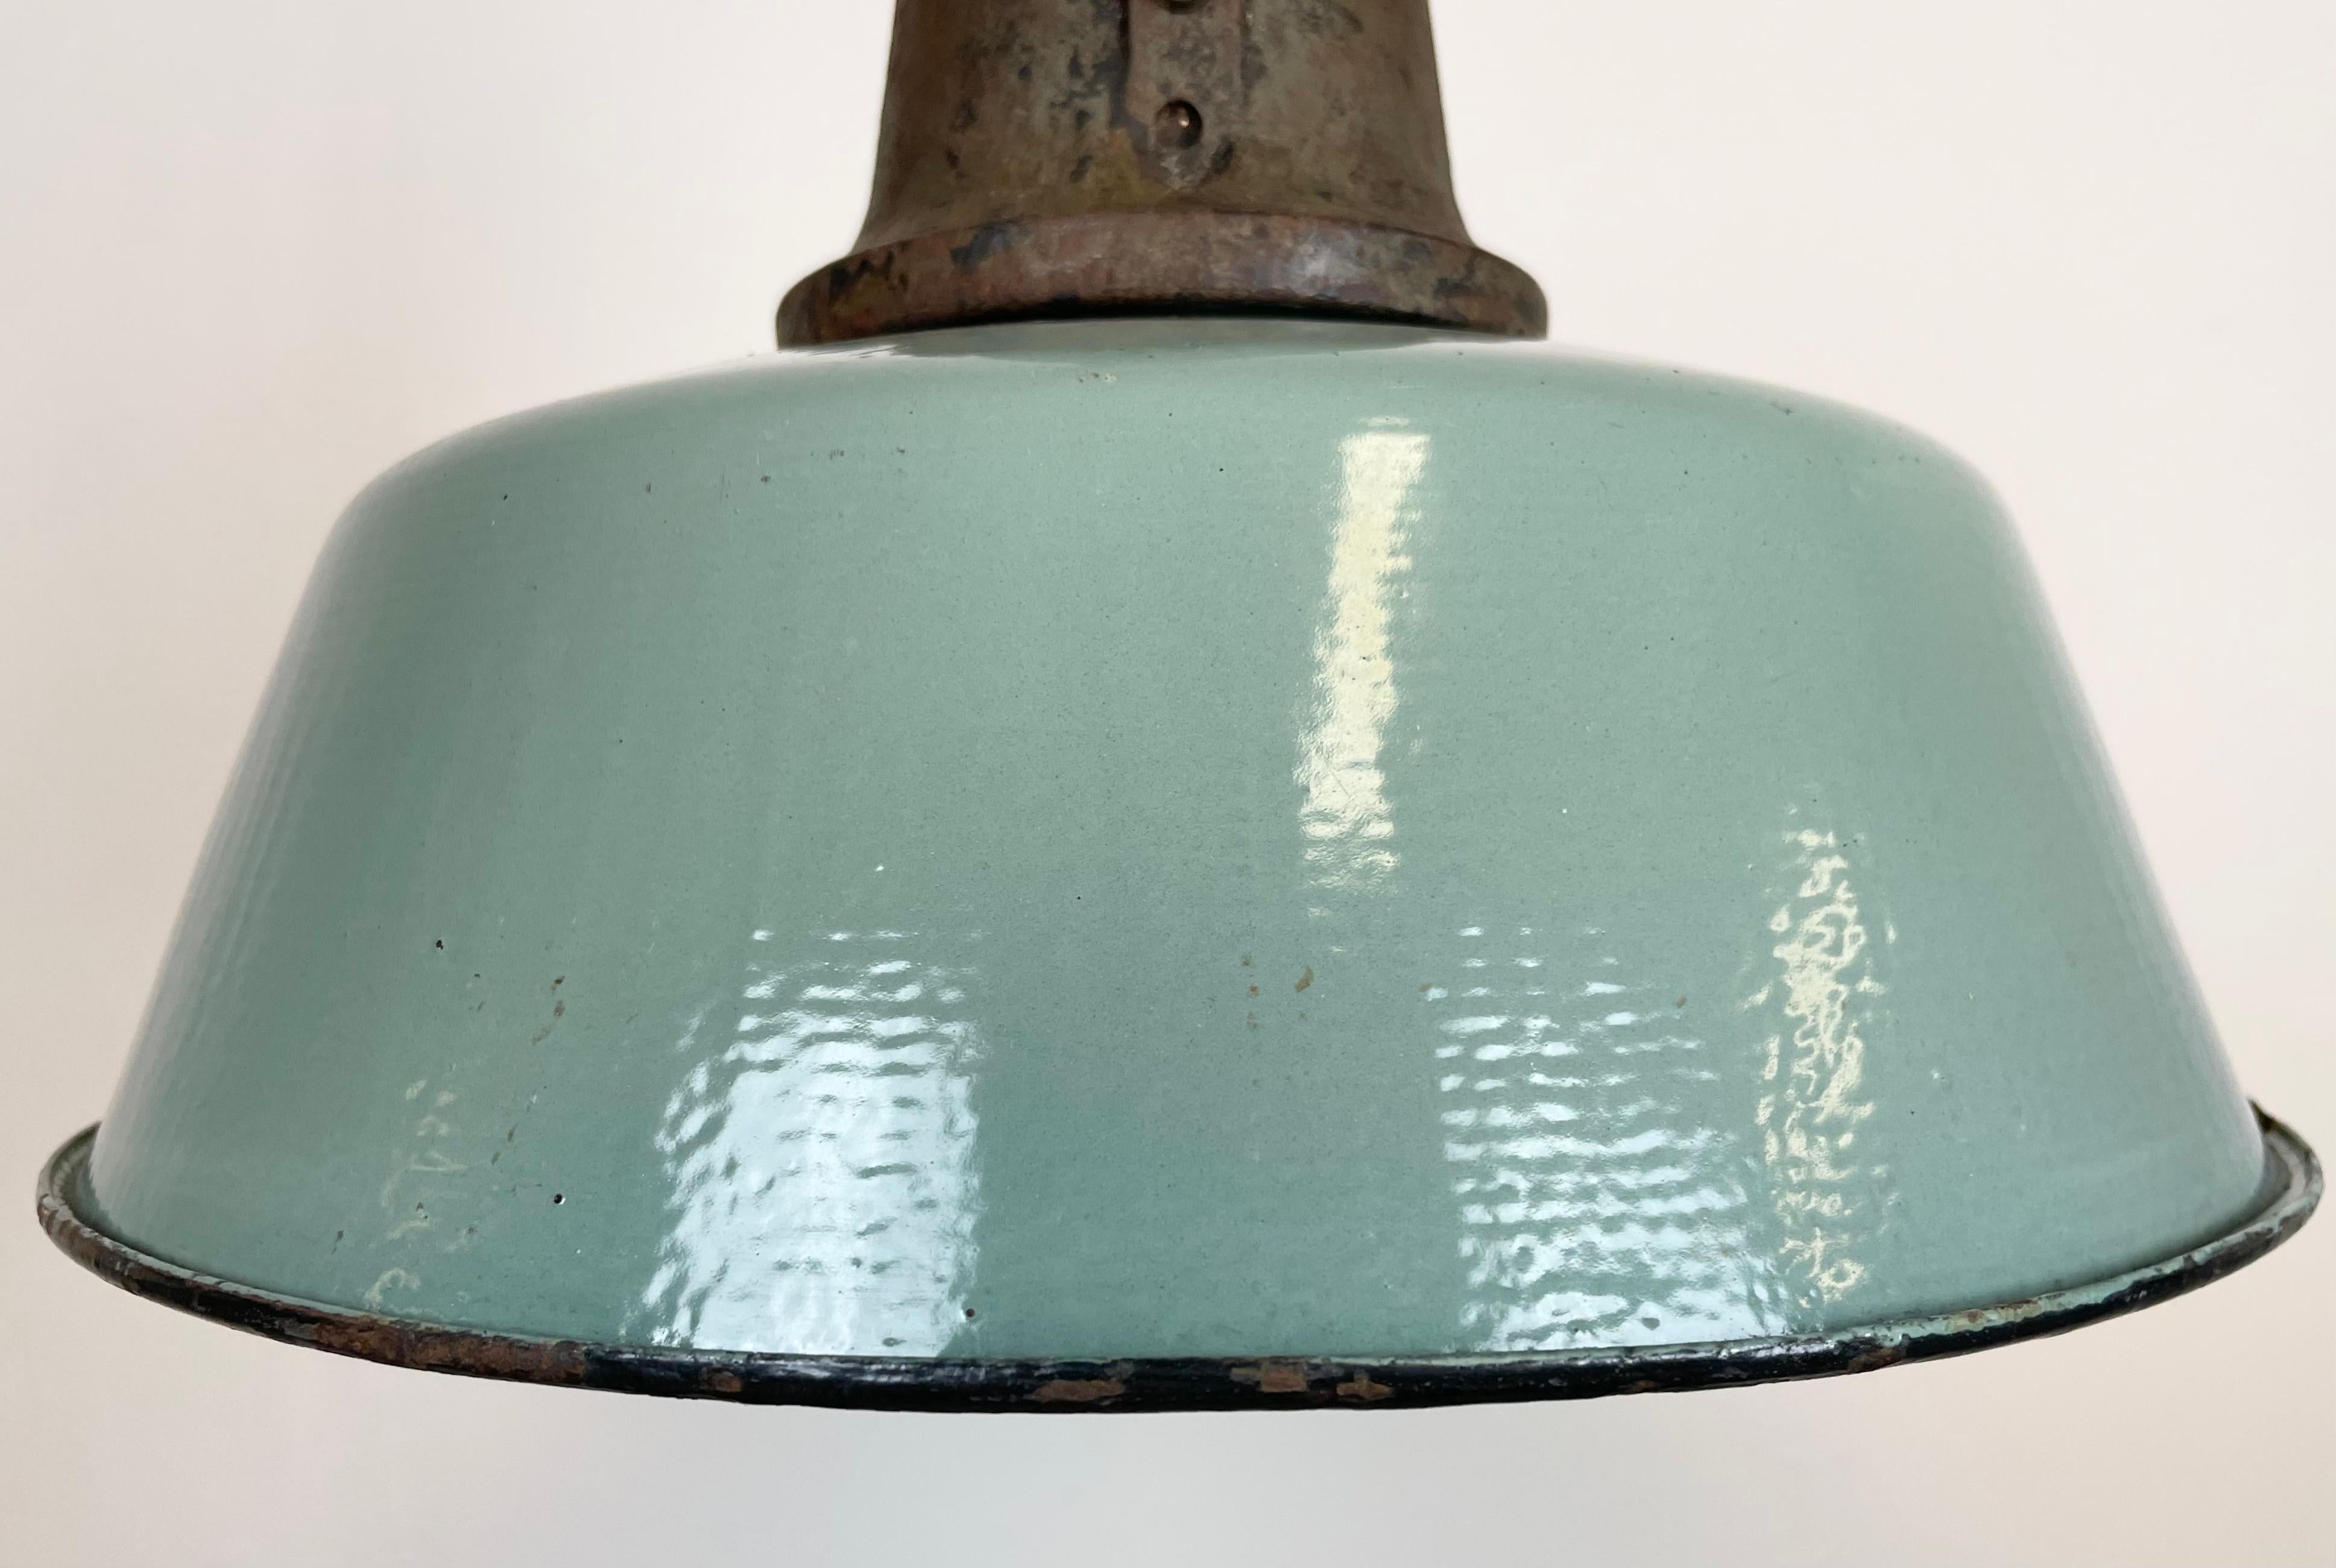 Polish Industrial Petrol Enamel Factory Lamp with Cast Iron Top, 1960s For Sale